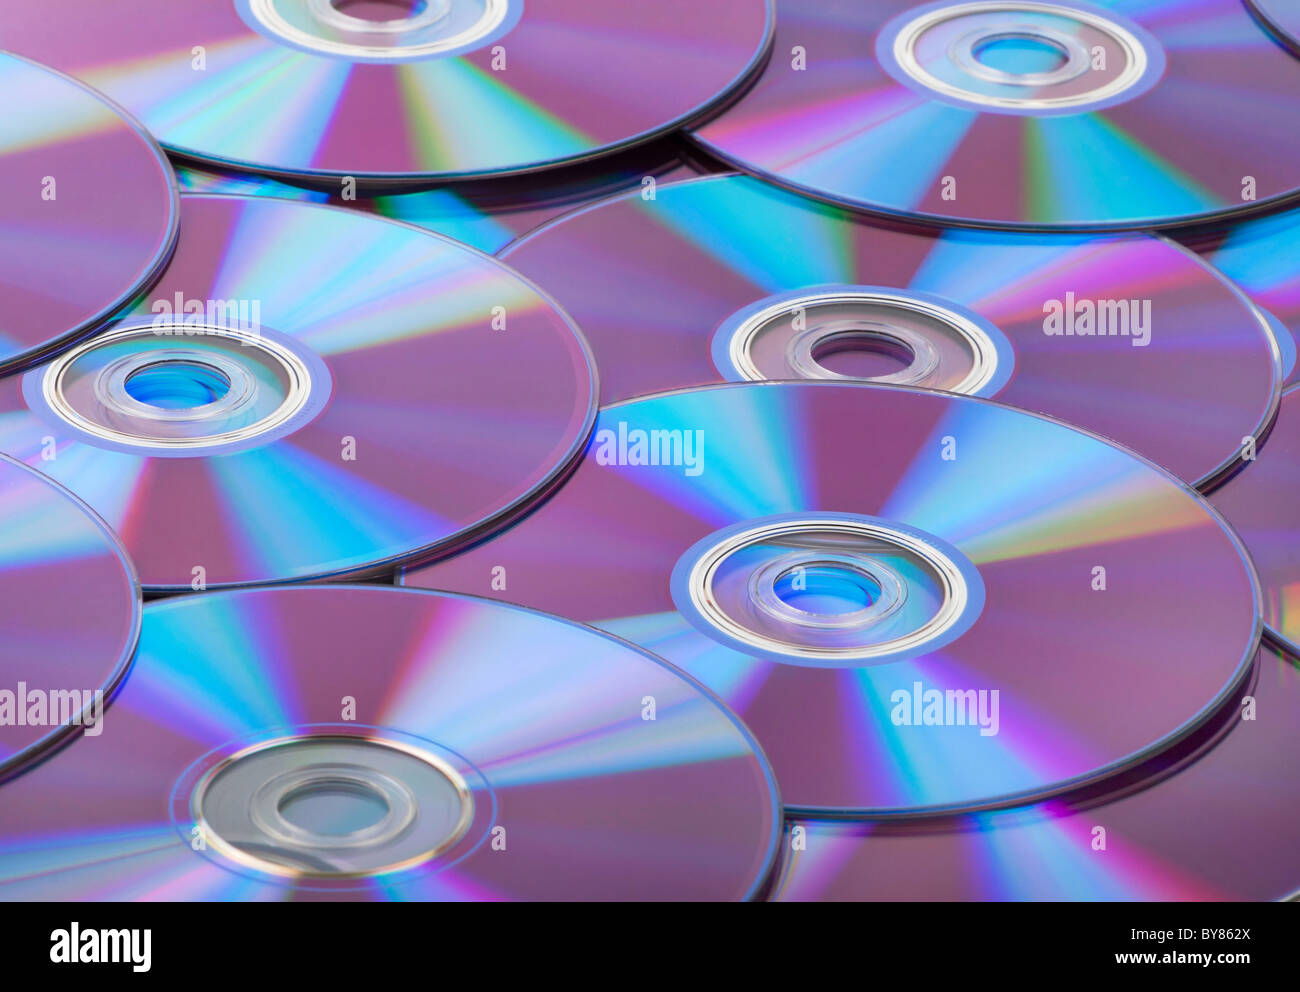 Compact discs CDs background Stock Photo